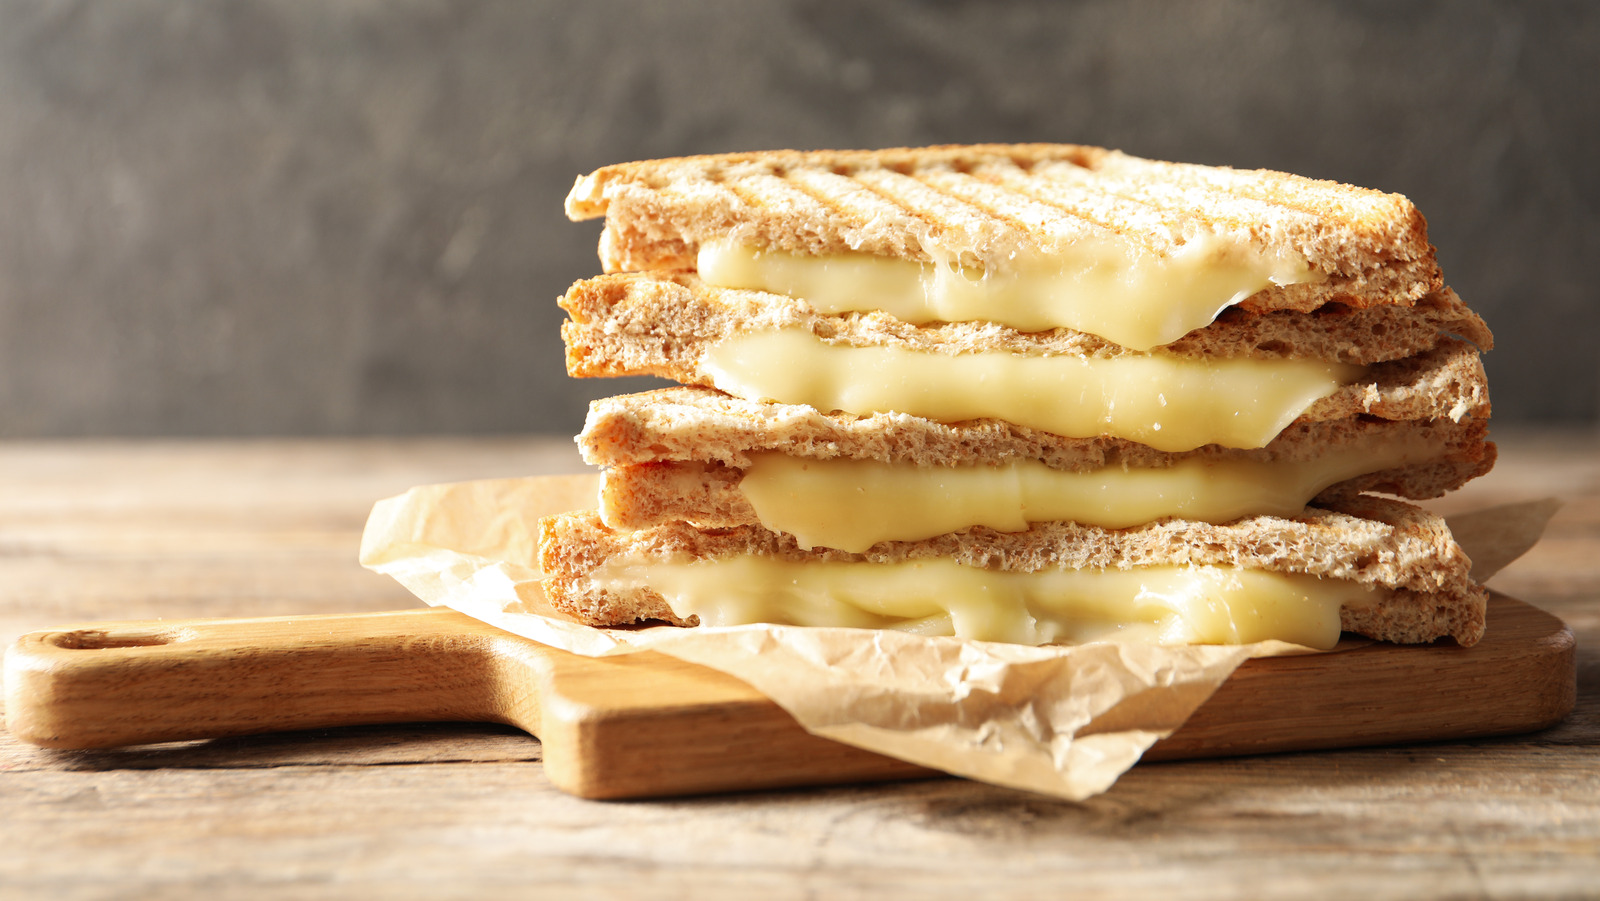 You're Doing It All Wrong - How to Make a Grilled Cheese Sandwich 